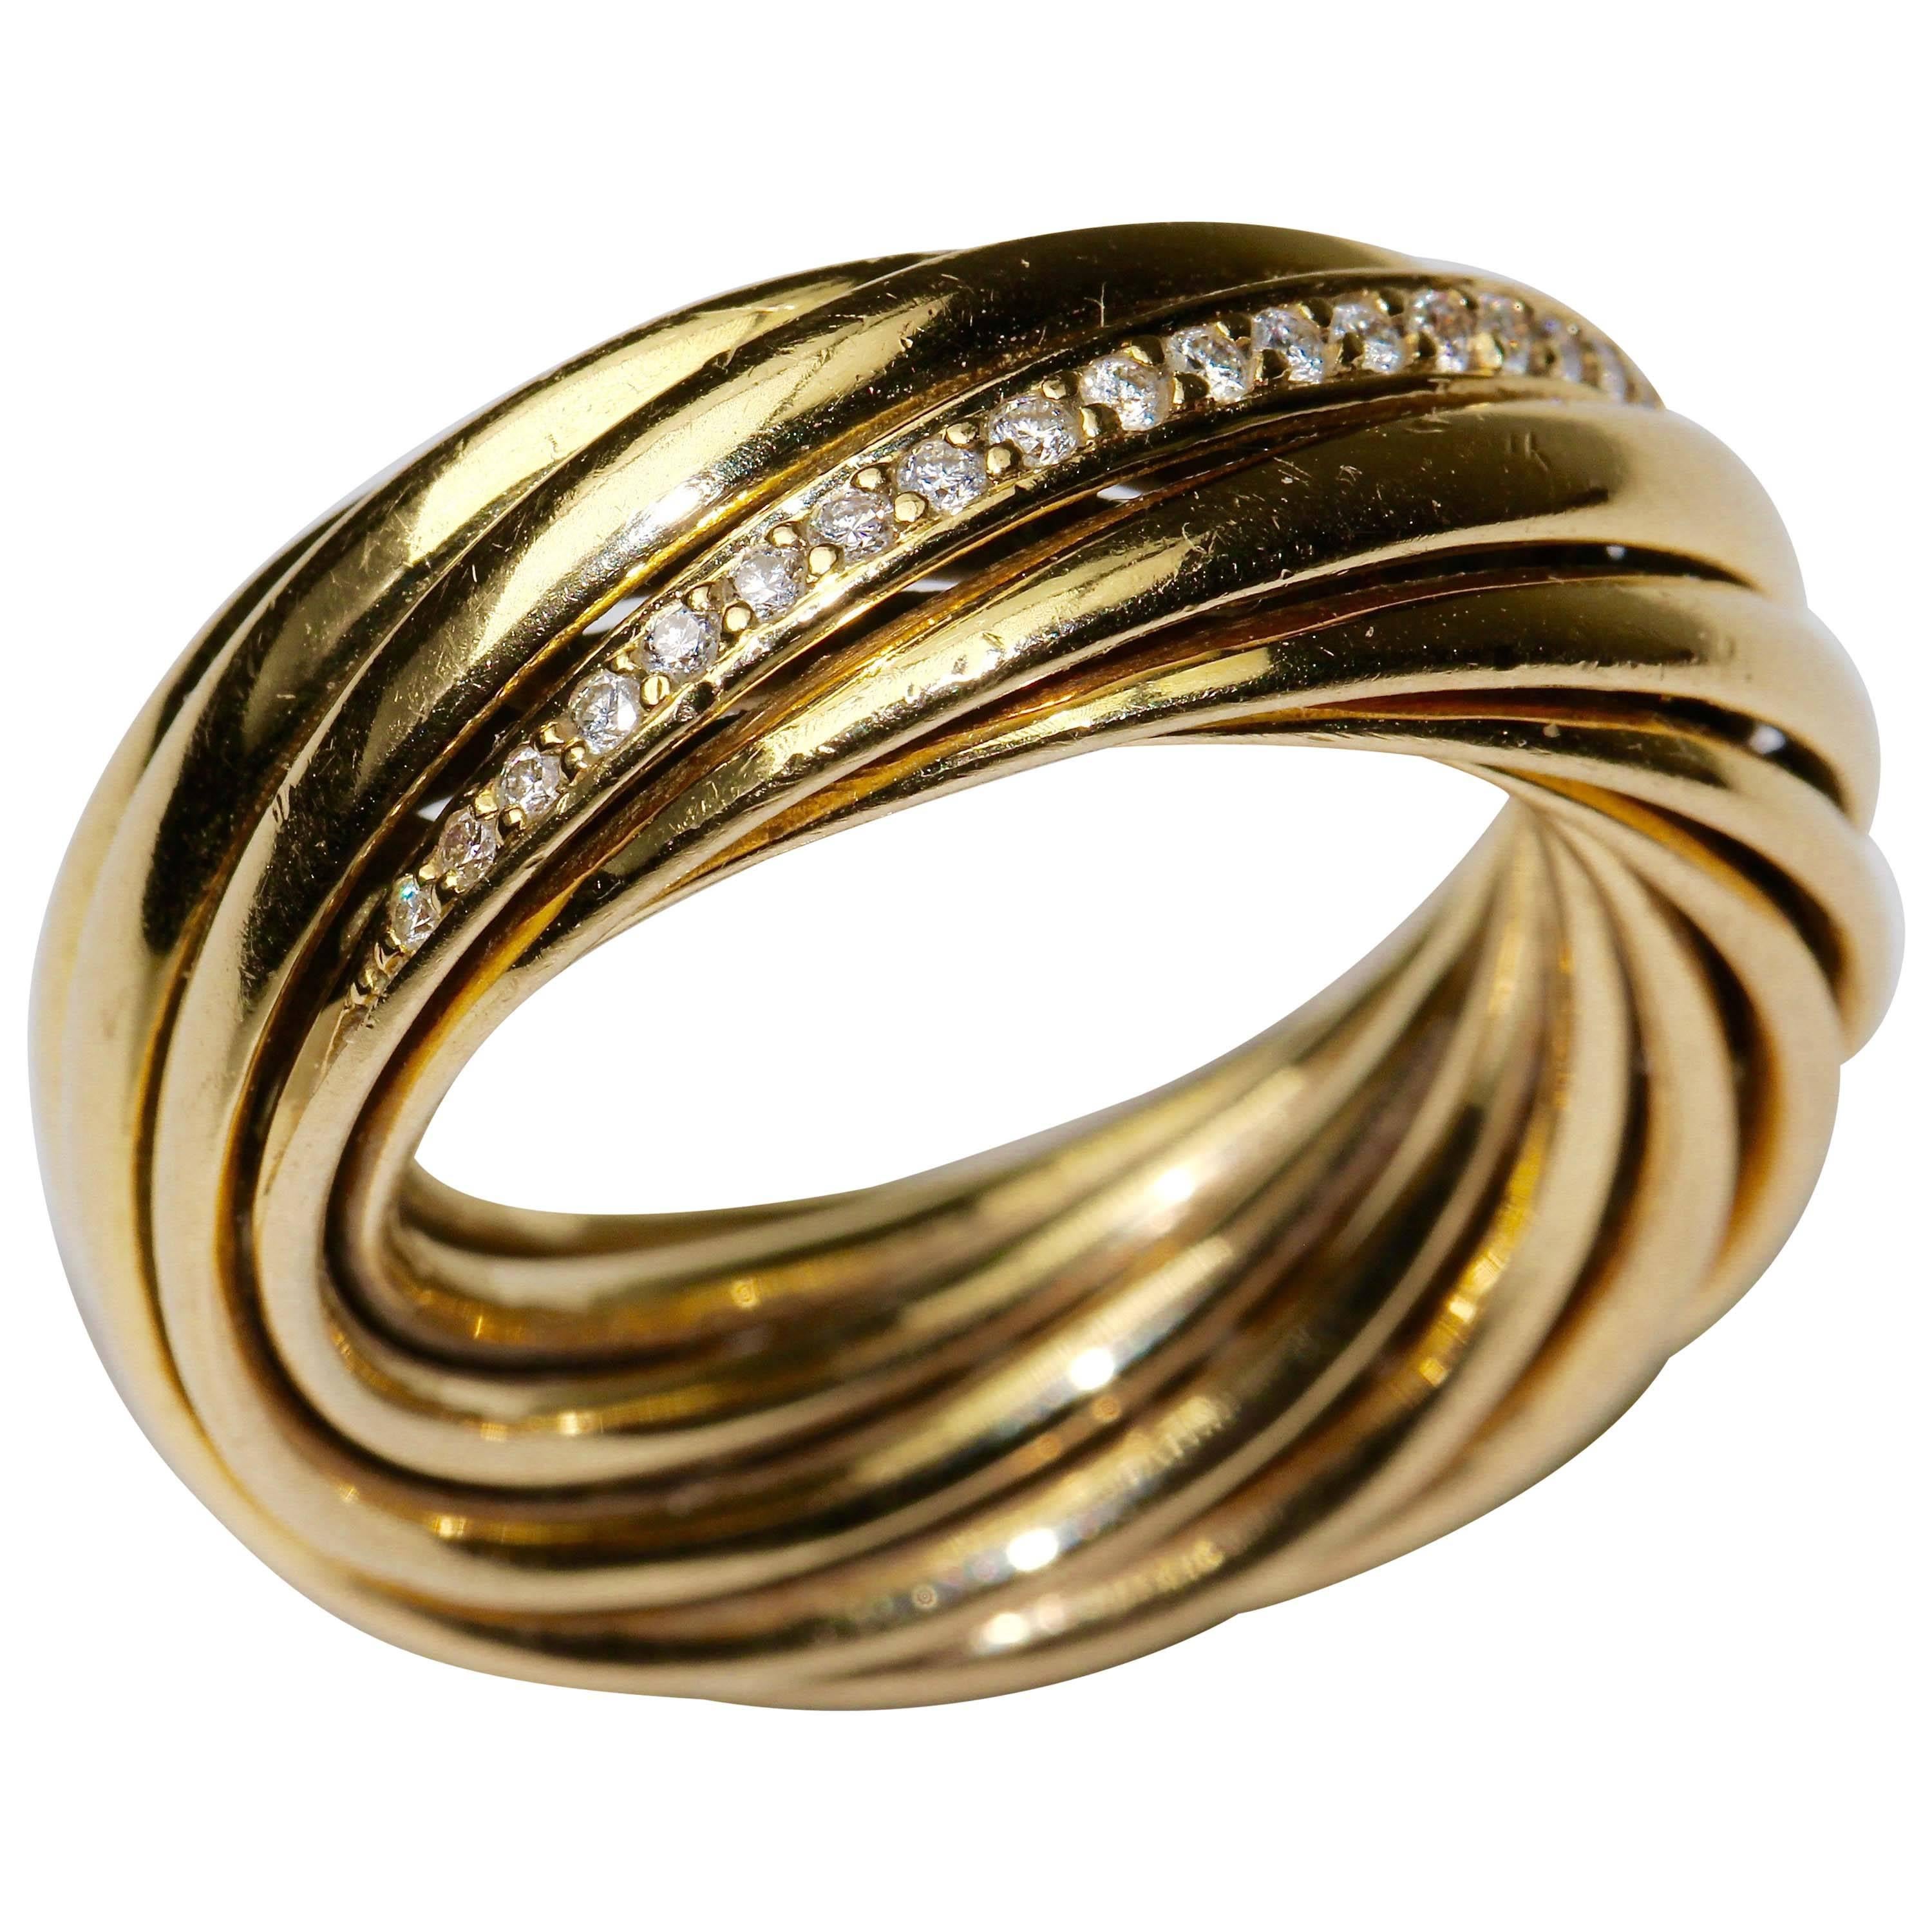 Braided 18K gold ring 'Helioro by Kim' WEMPE, set with 36 diamonds, For Sale